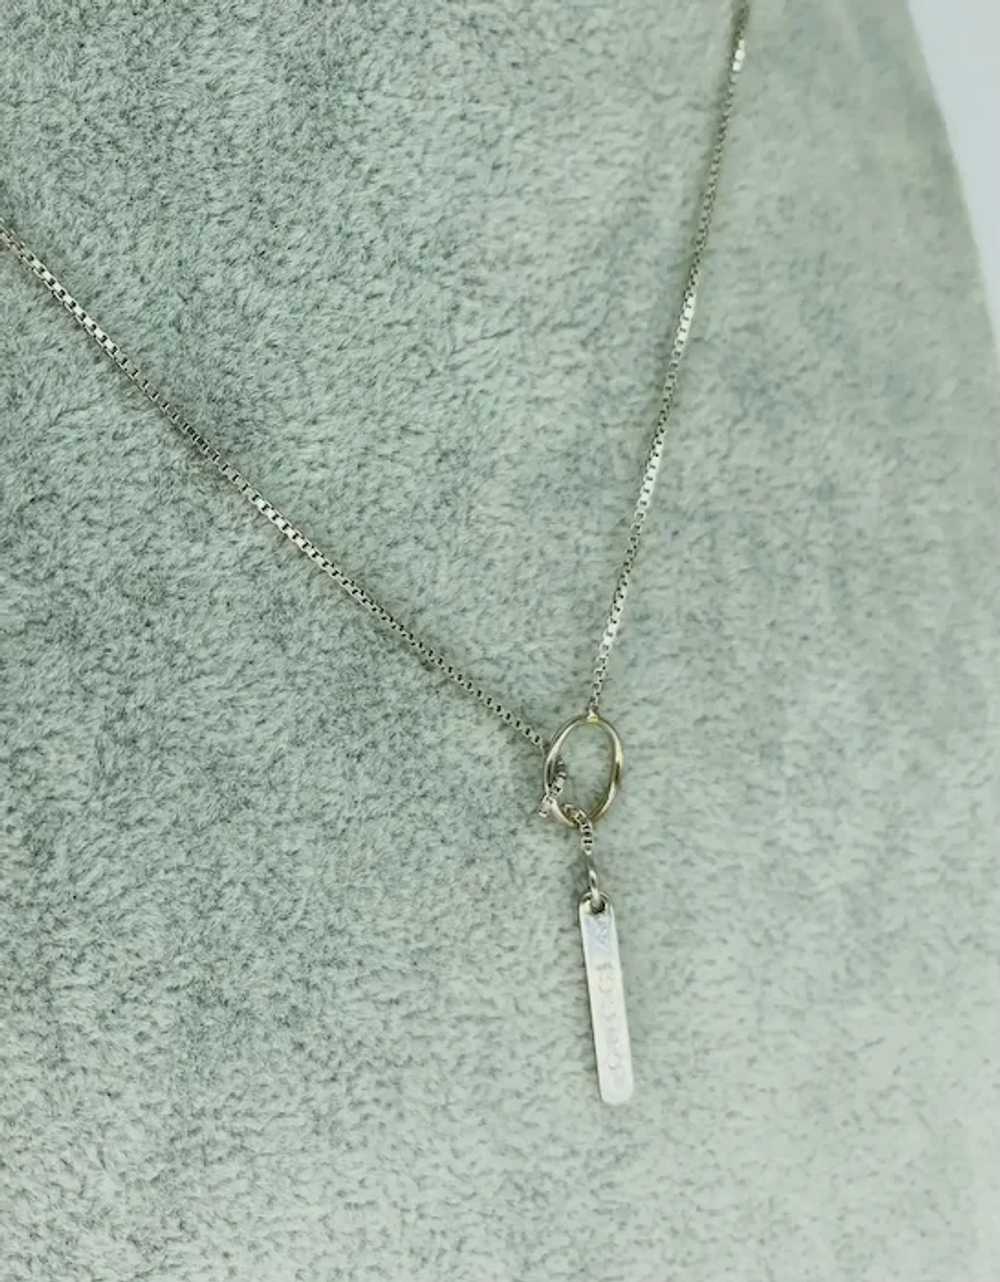 Gucci Drop Necklace 18k White Gold Italy - image 3